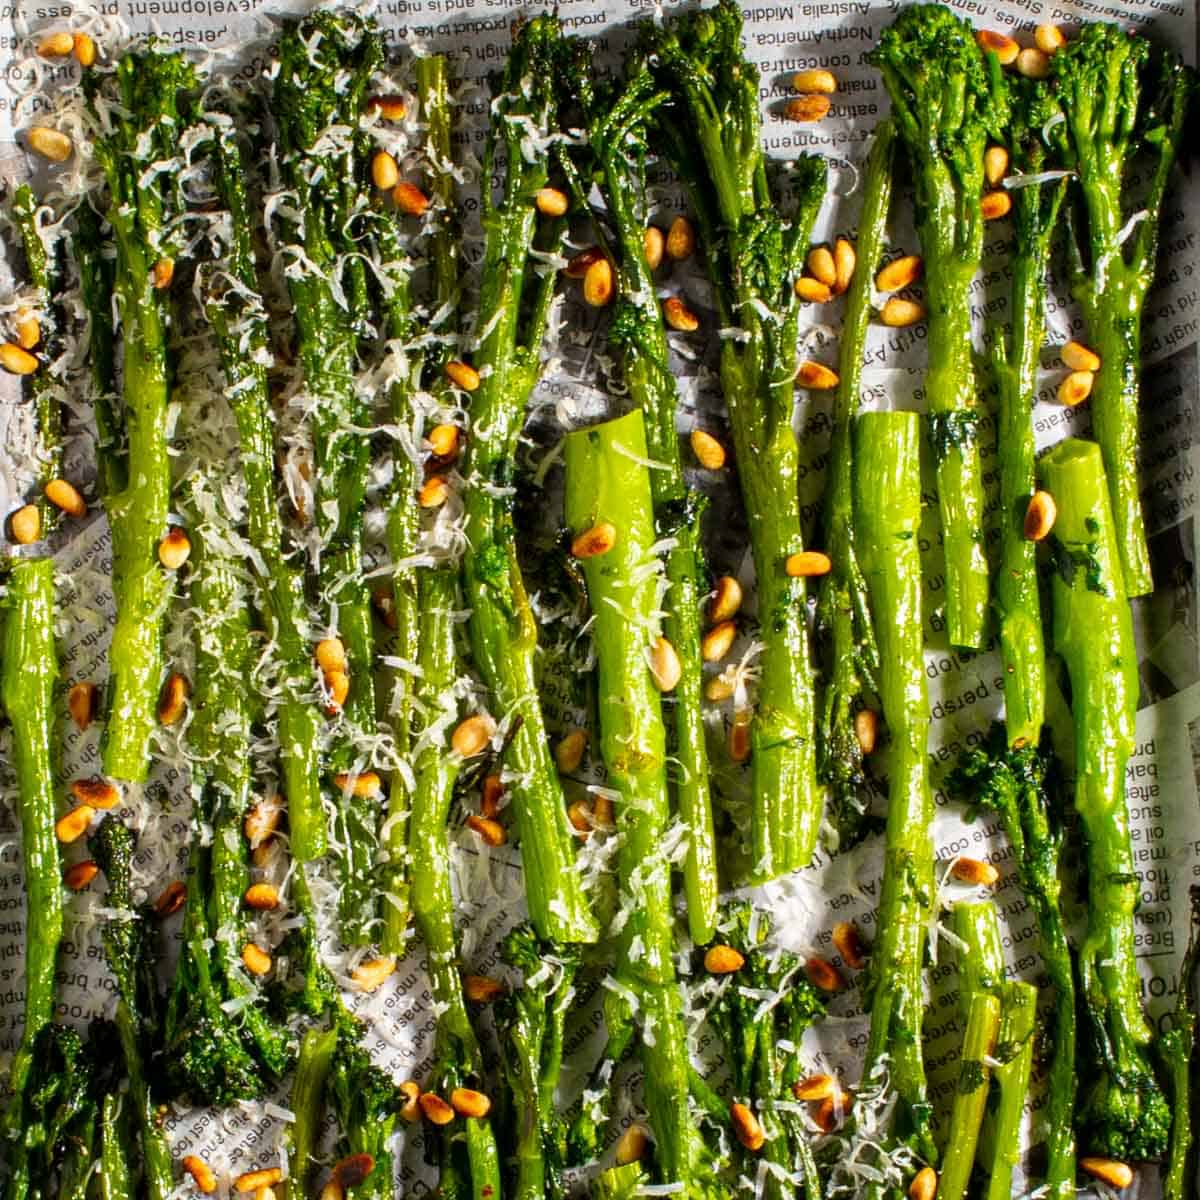 Long green cooked stalks of broccolini topped with slivered nuts.